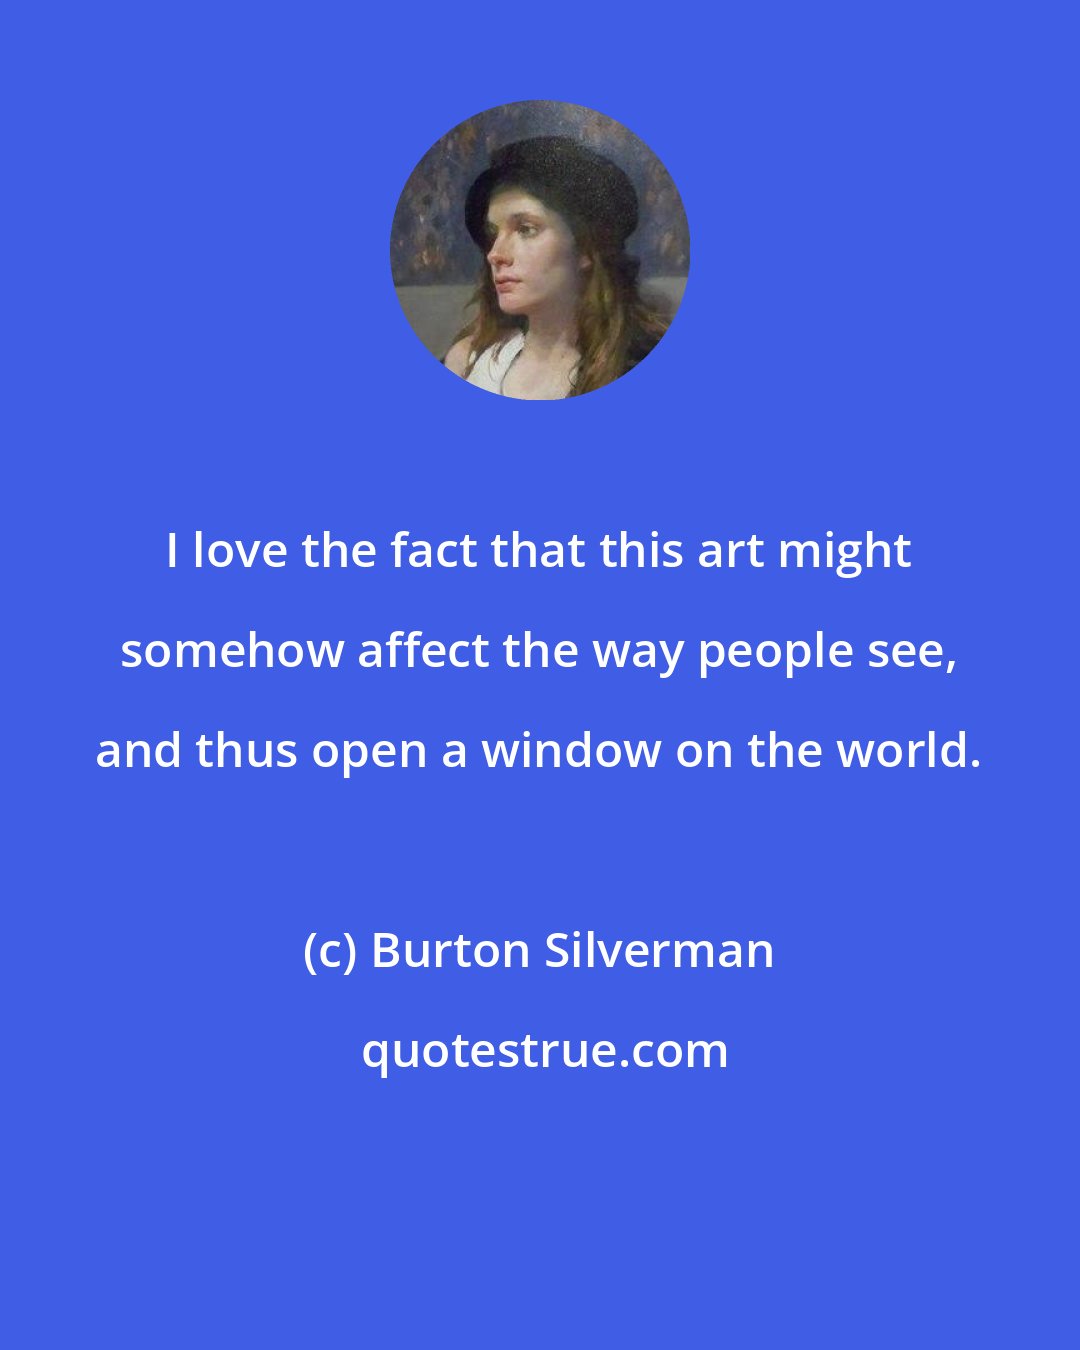 Burton Silverman: I love the fact that this art might somehow affect the way people see, and thus open a window on the world.